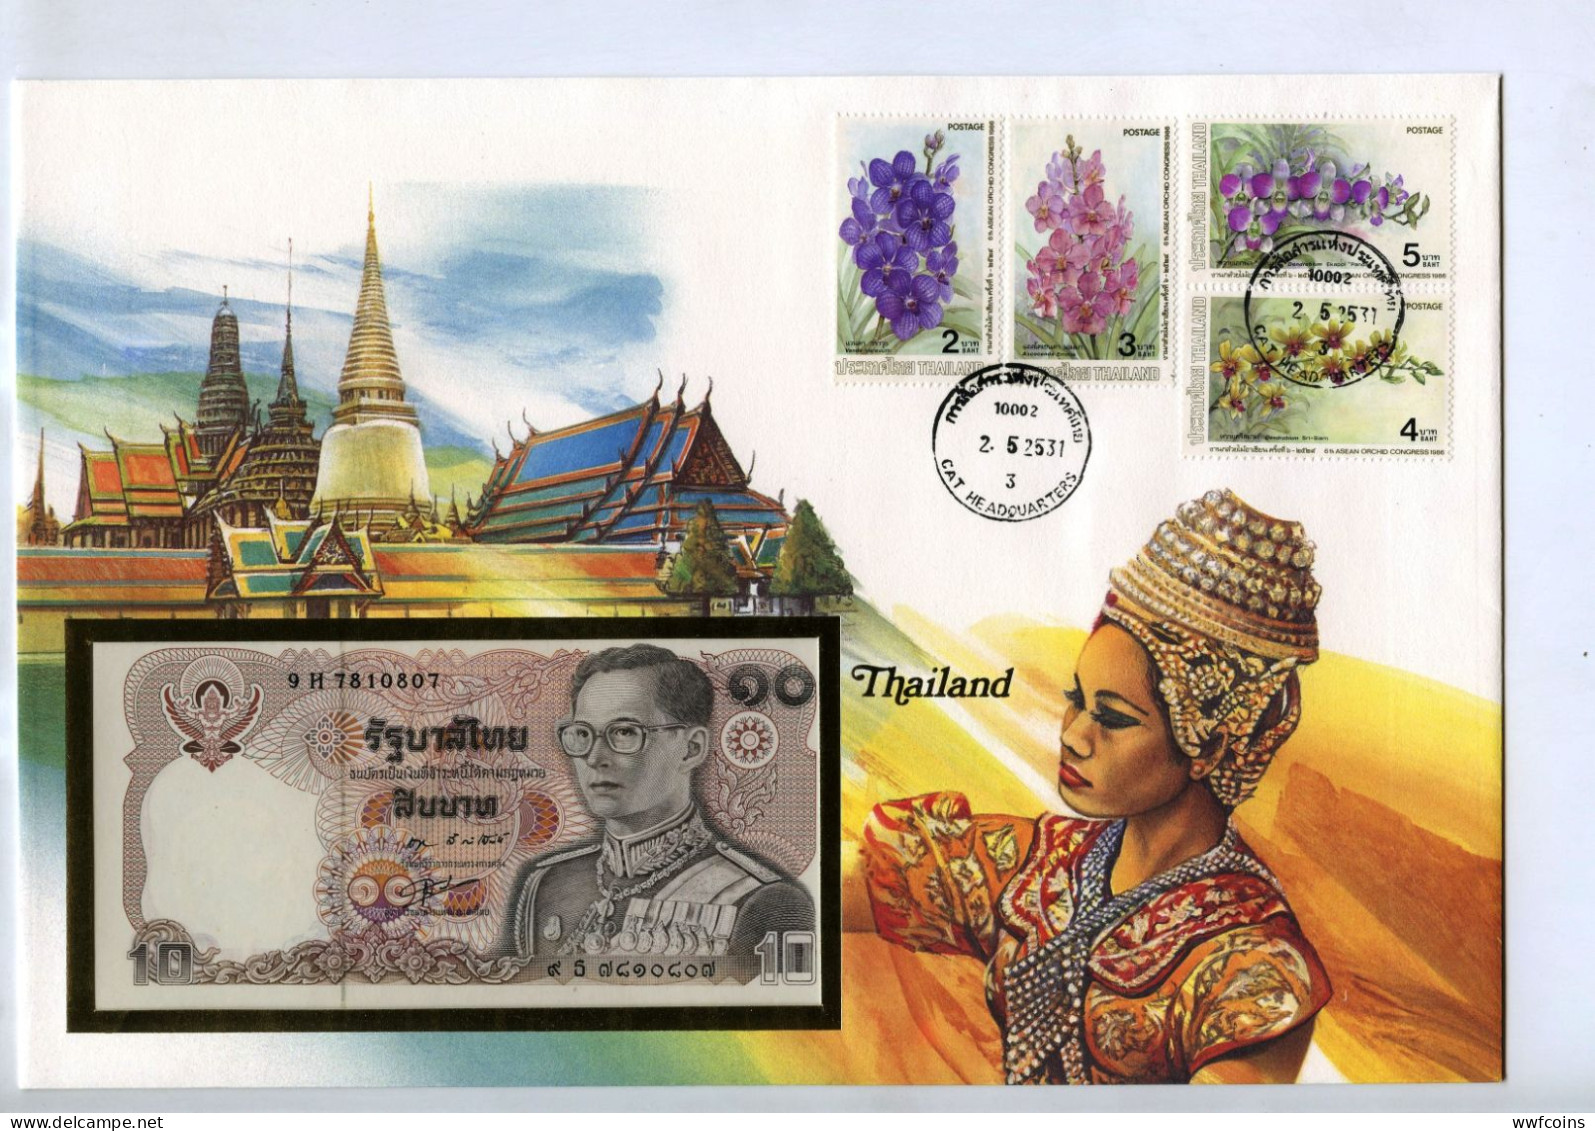 GIANT POSTCARD COMMEMORATIVE TAILANDIA THAILAND ORCHIDEA FLOWER FIRST DAY ISSUE FDS UNC (1) - Tailandia